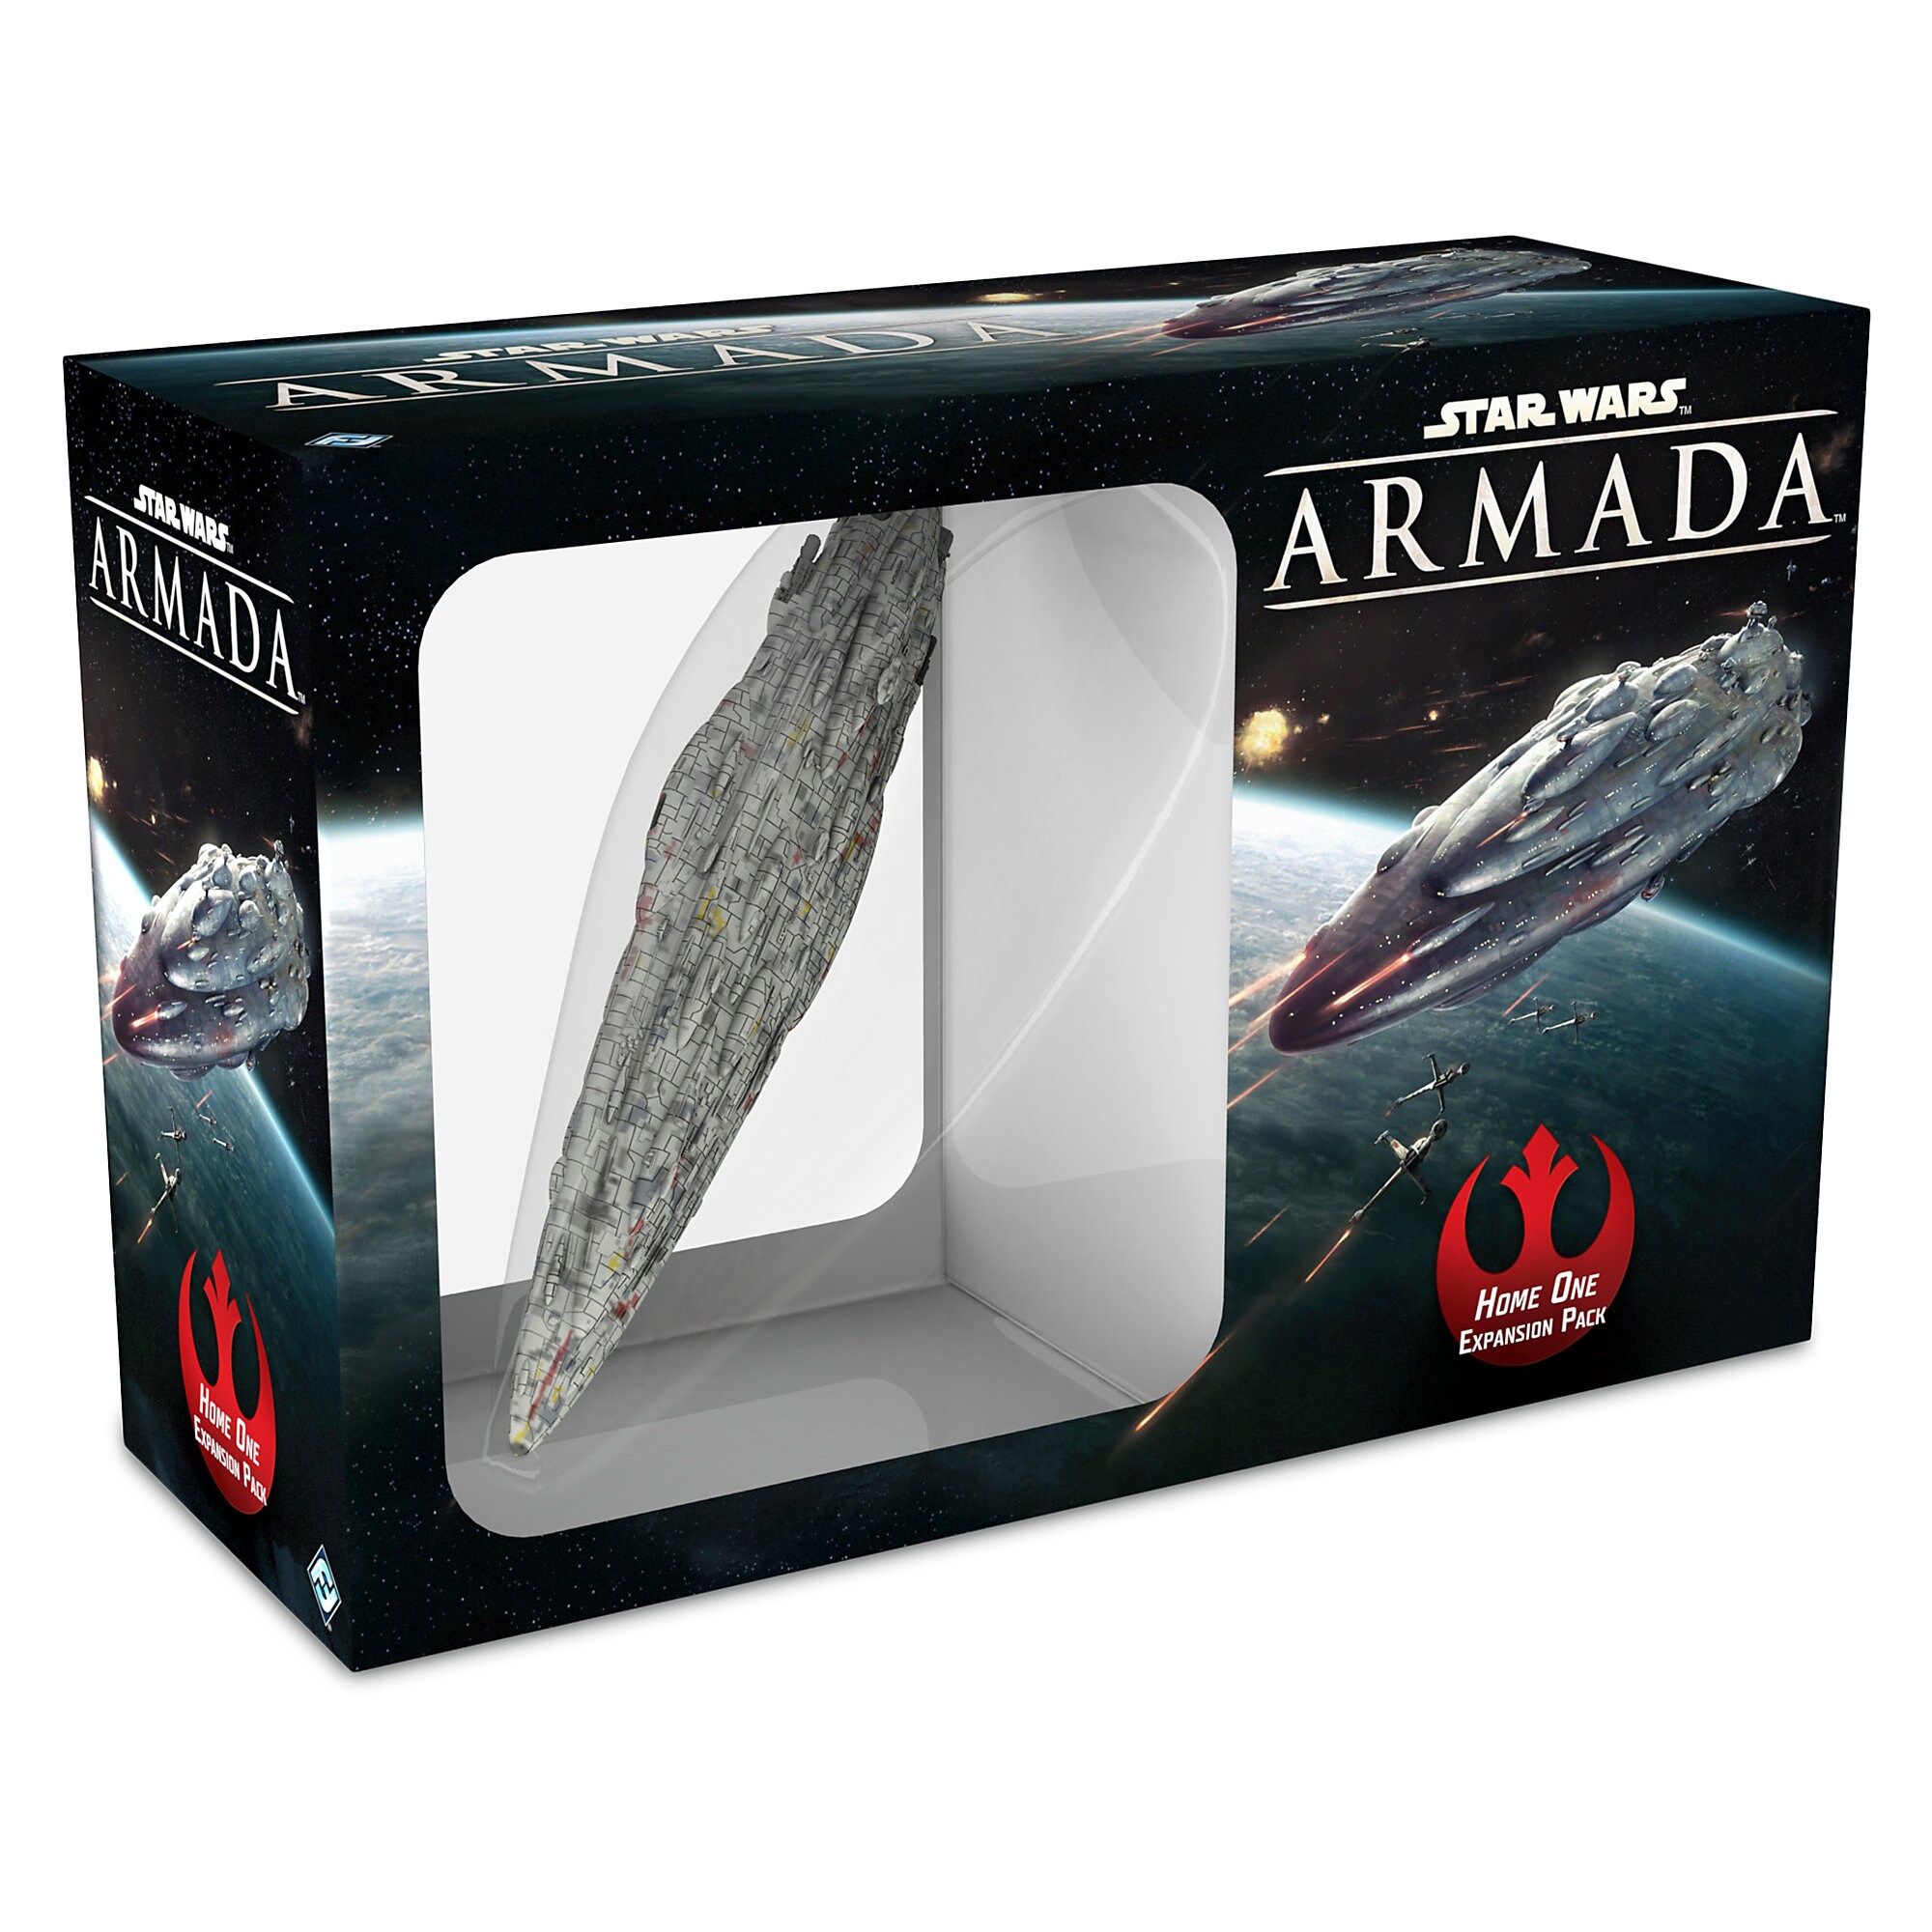 Star Wars: Armada Game - Home One Expansion Pack